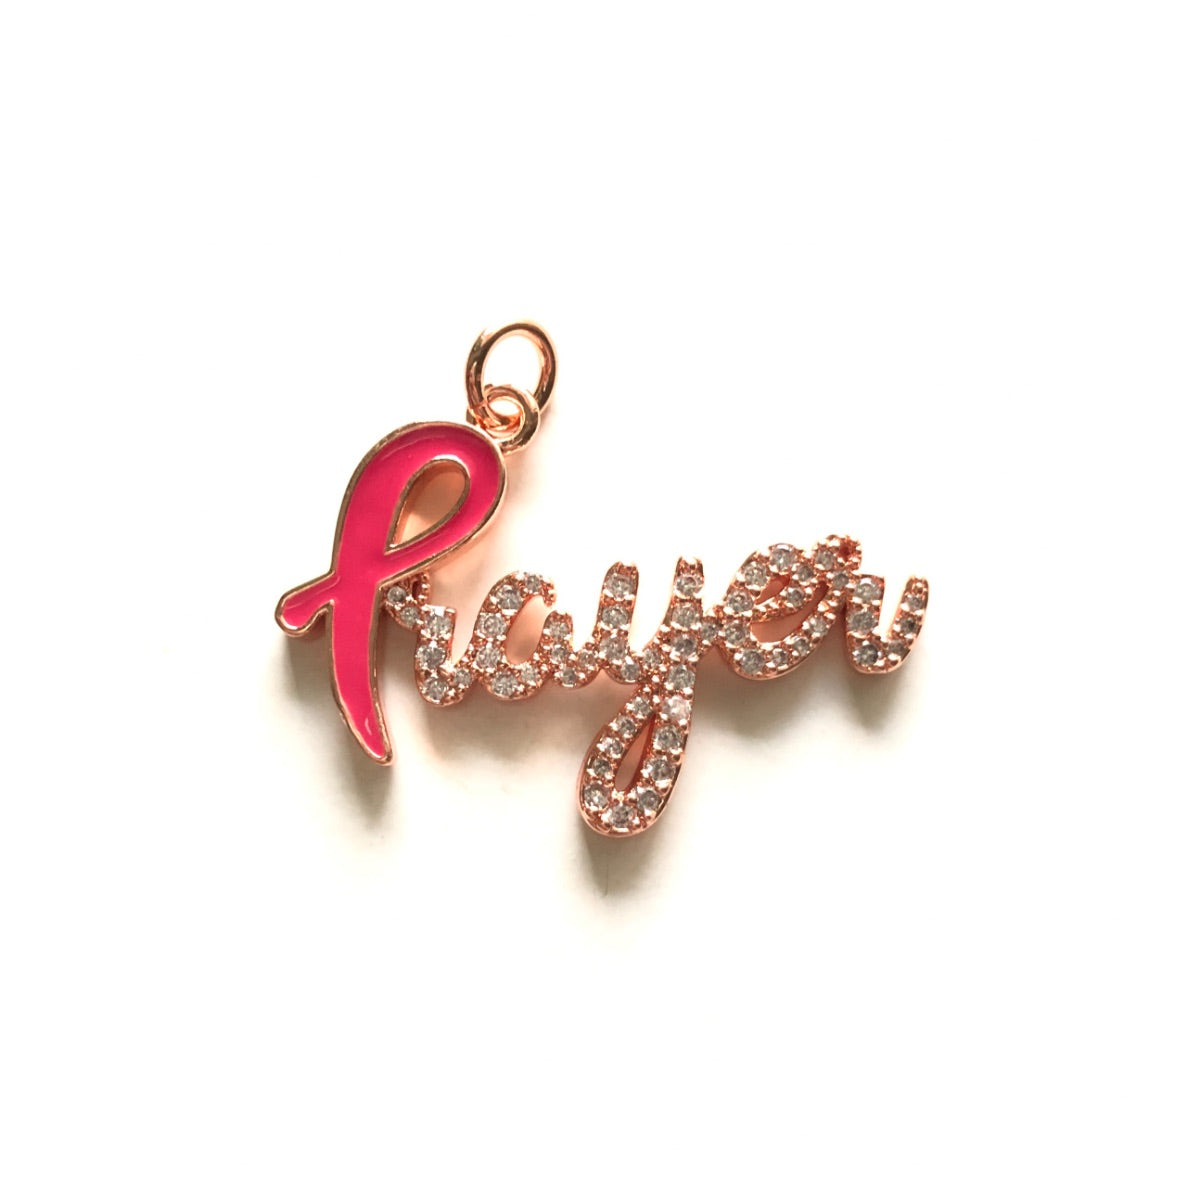 10pcs/lot CZ Paved Pink Ribbon Prayer Charms - Breast Cancer Awareness Rose Gold CZ Paved Charms Breast Cancer Awareness Charms Beads Beyond